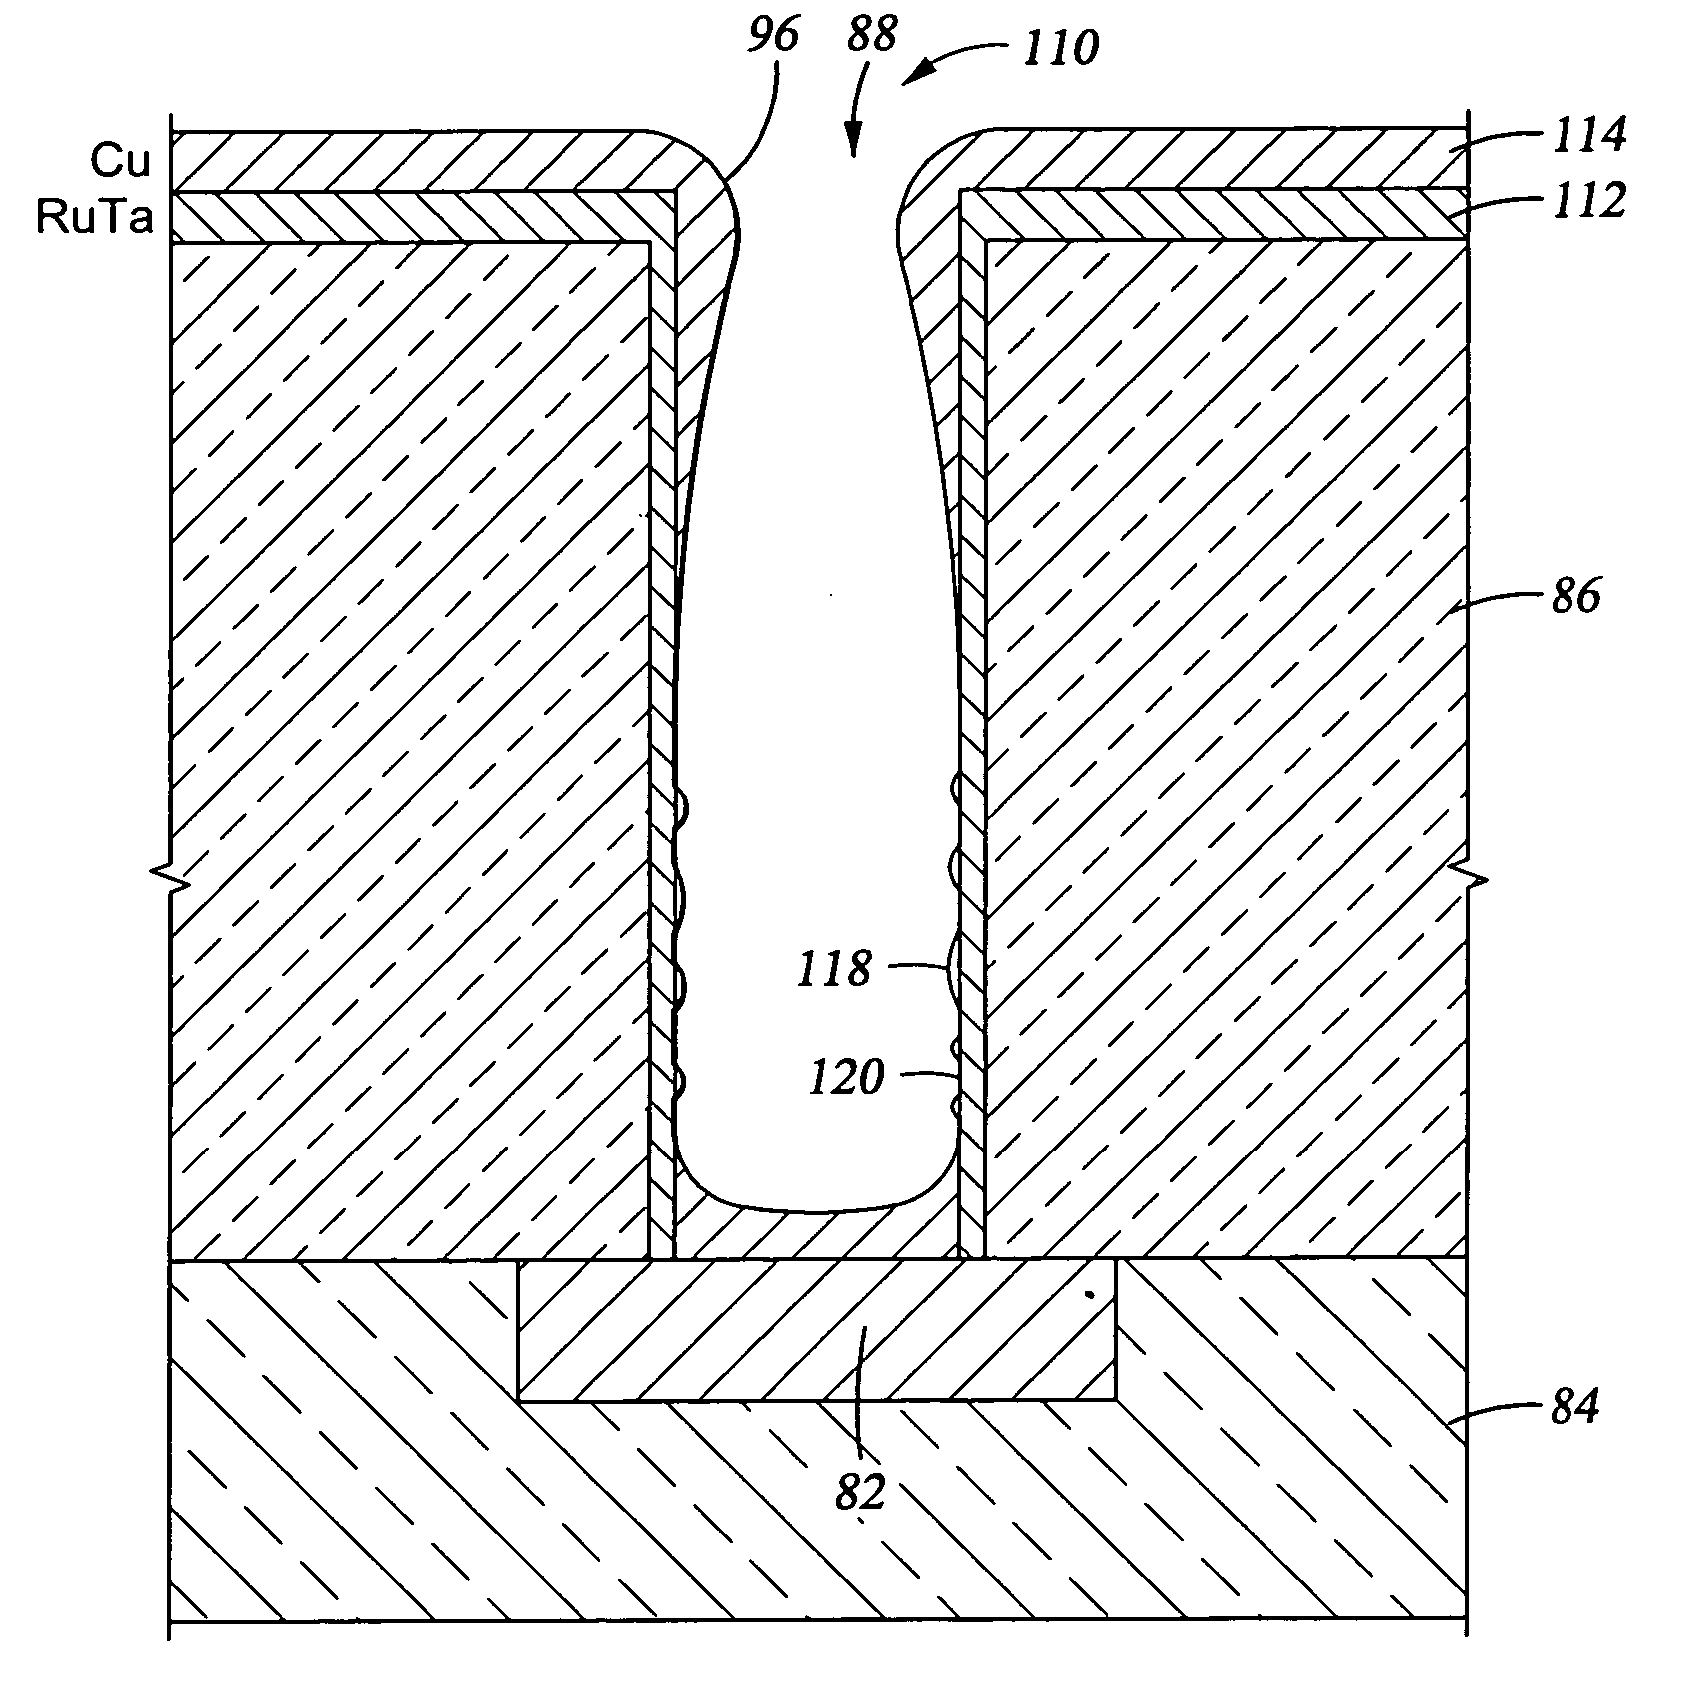 Integrated process for sputter deposition of a conductive barrier layer, especially an alloy of ruthenium and tantalum, underlying copper or copper alloy seed layer